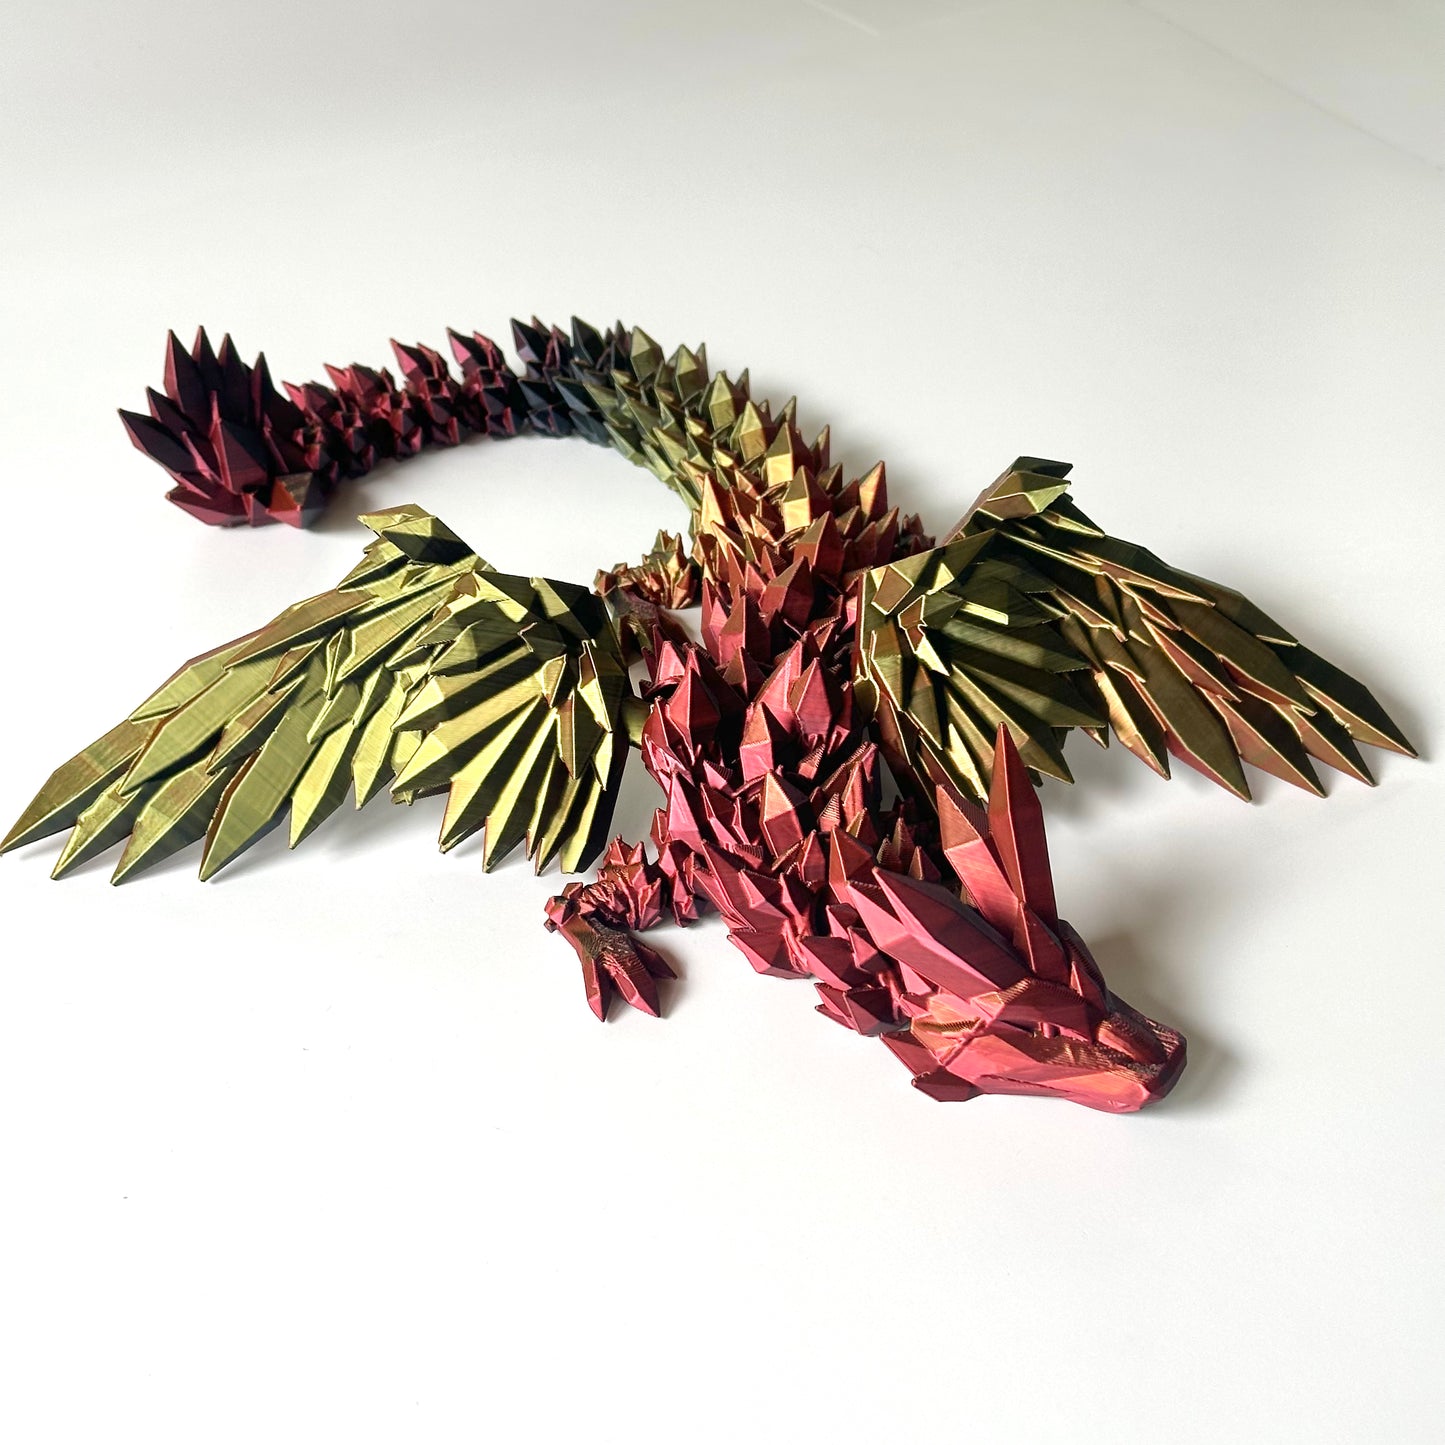 Large Crystal Wing Dragon - 3D Printed Articulating Figure